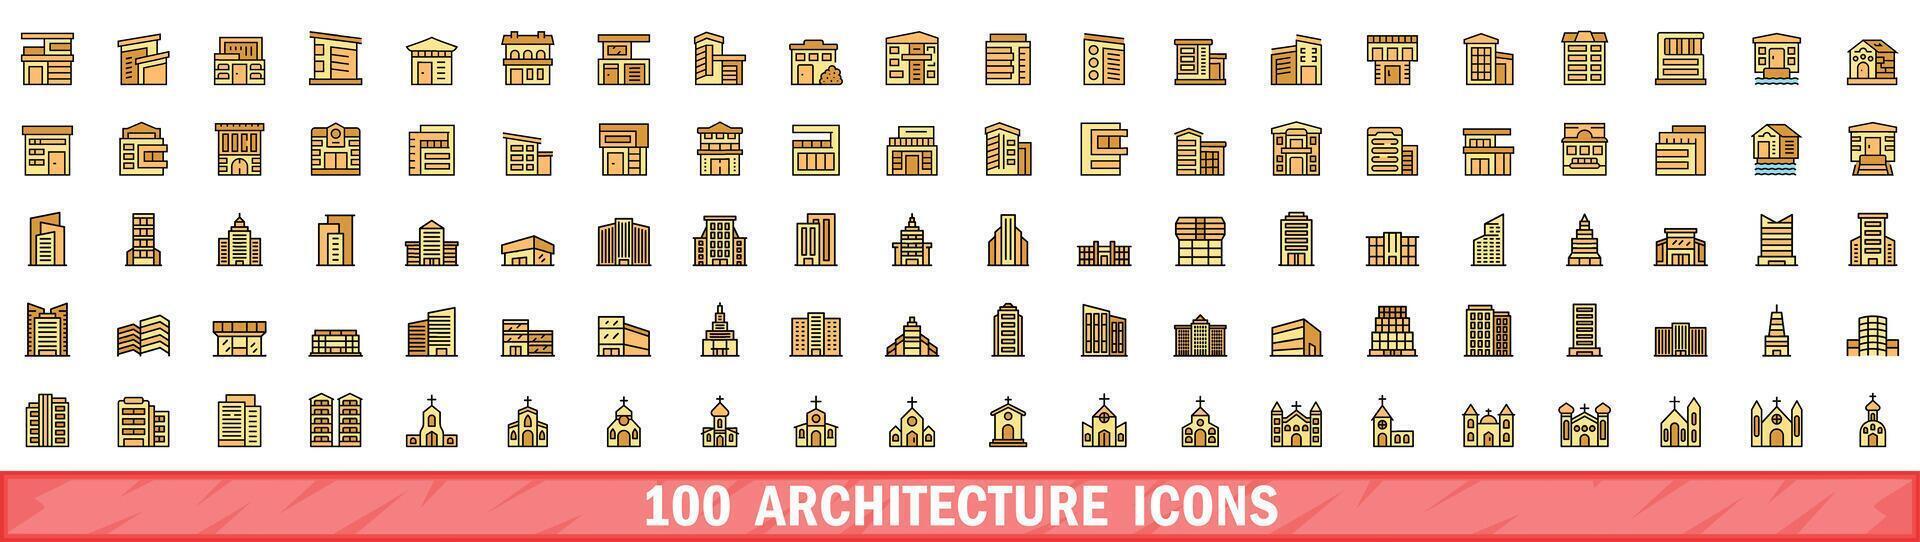 100 architecture icons set, color line style vector